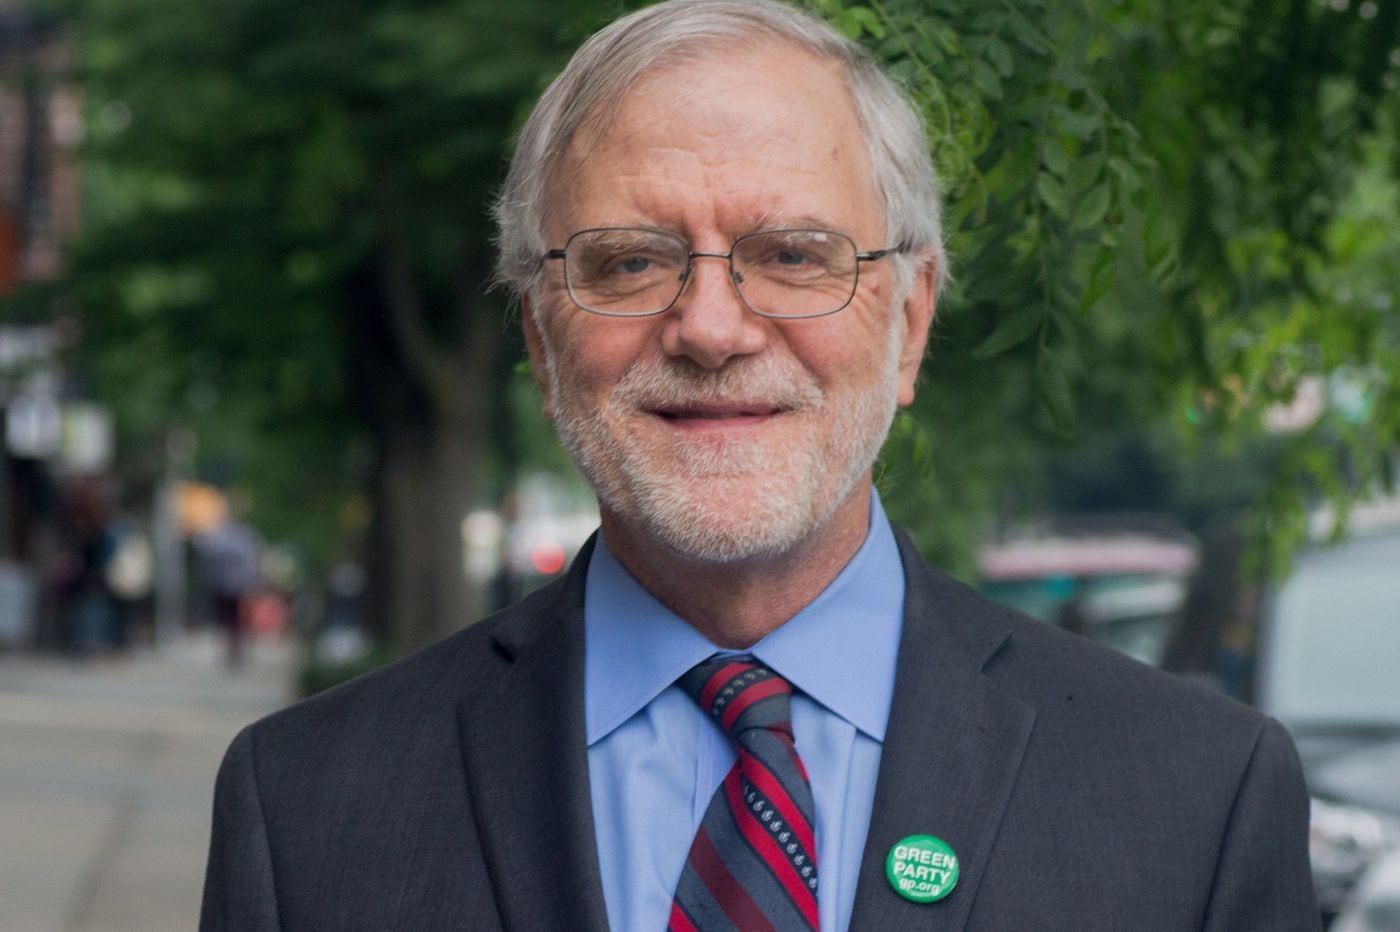 Green Party presidential candidate is off Pennsylvania ballot in big